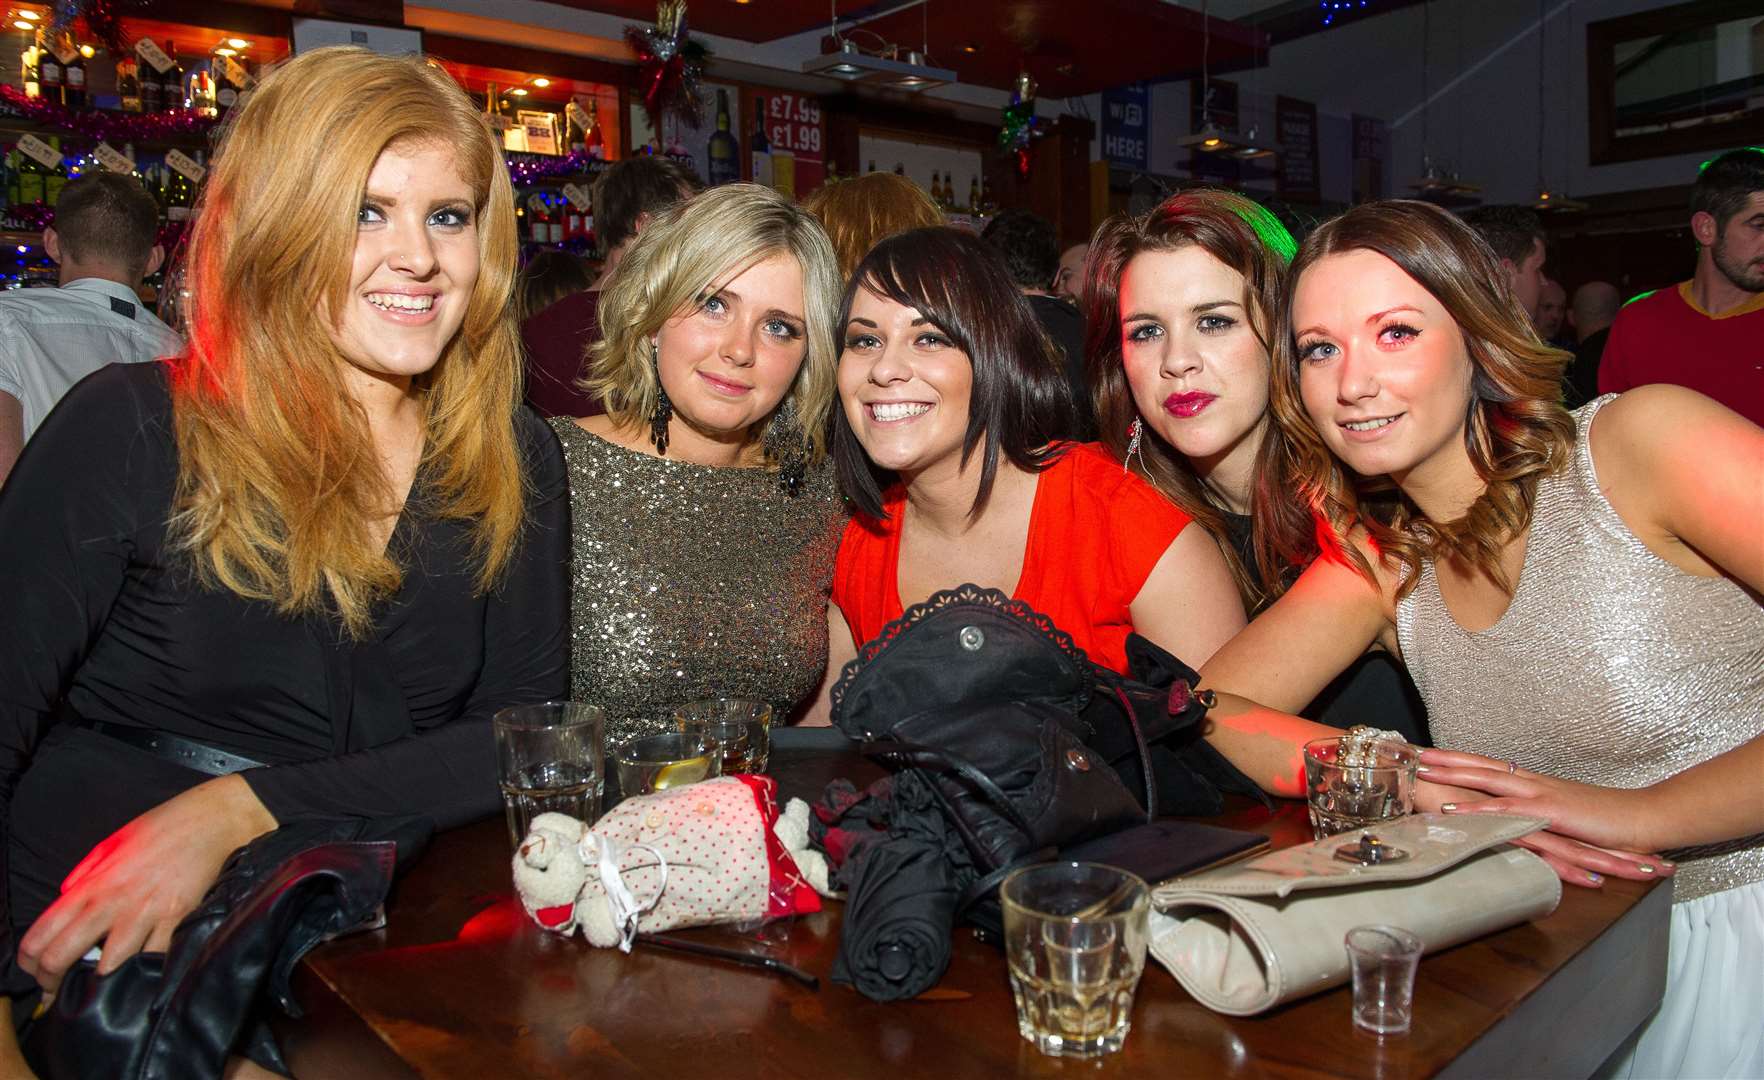 CitySeen 15DEC..Ralph Crook's Hairdressers Xmas night out in Auctioneers...Picture: Callum Mackay. Image No. 0020422.